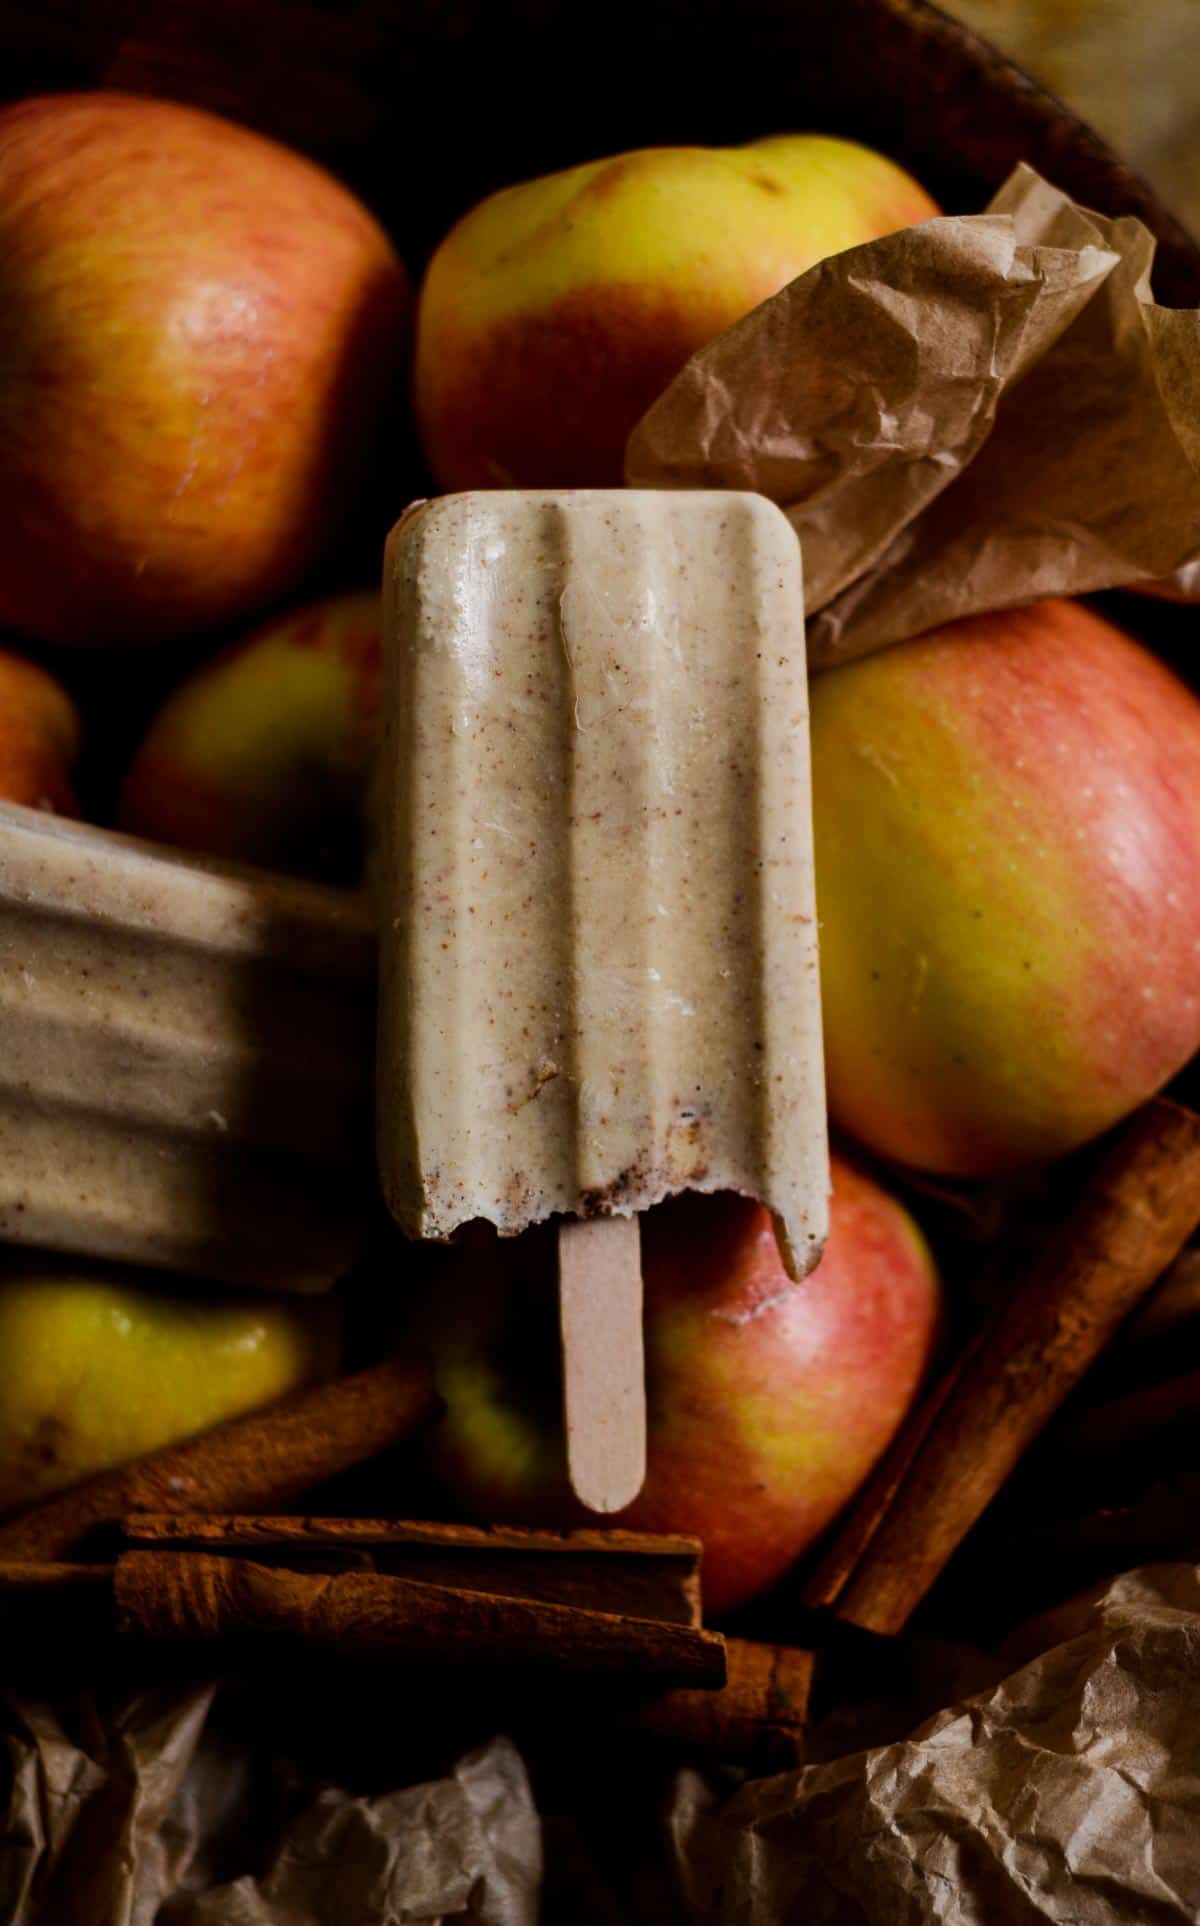 Apple popsicle in a bowl of yellow and red apples and cinnamon.